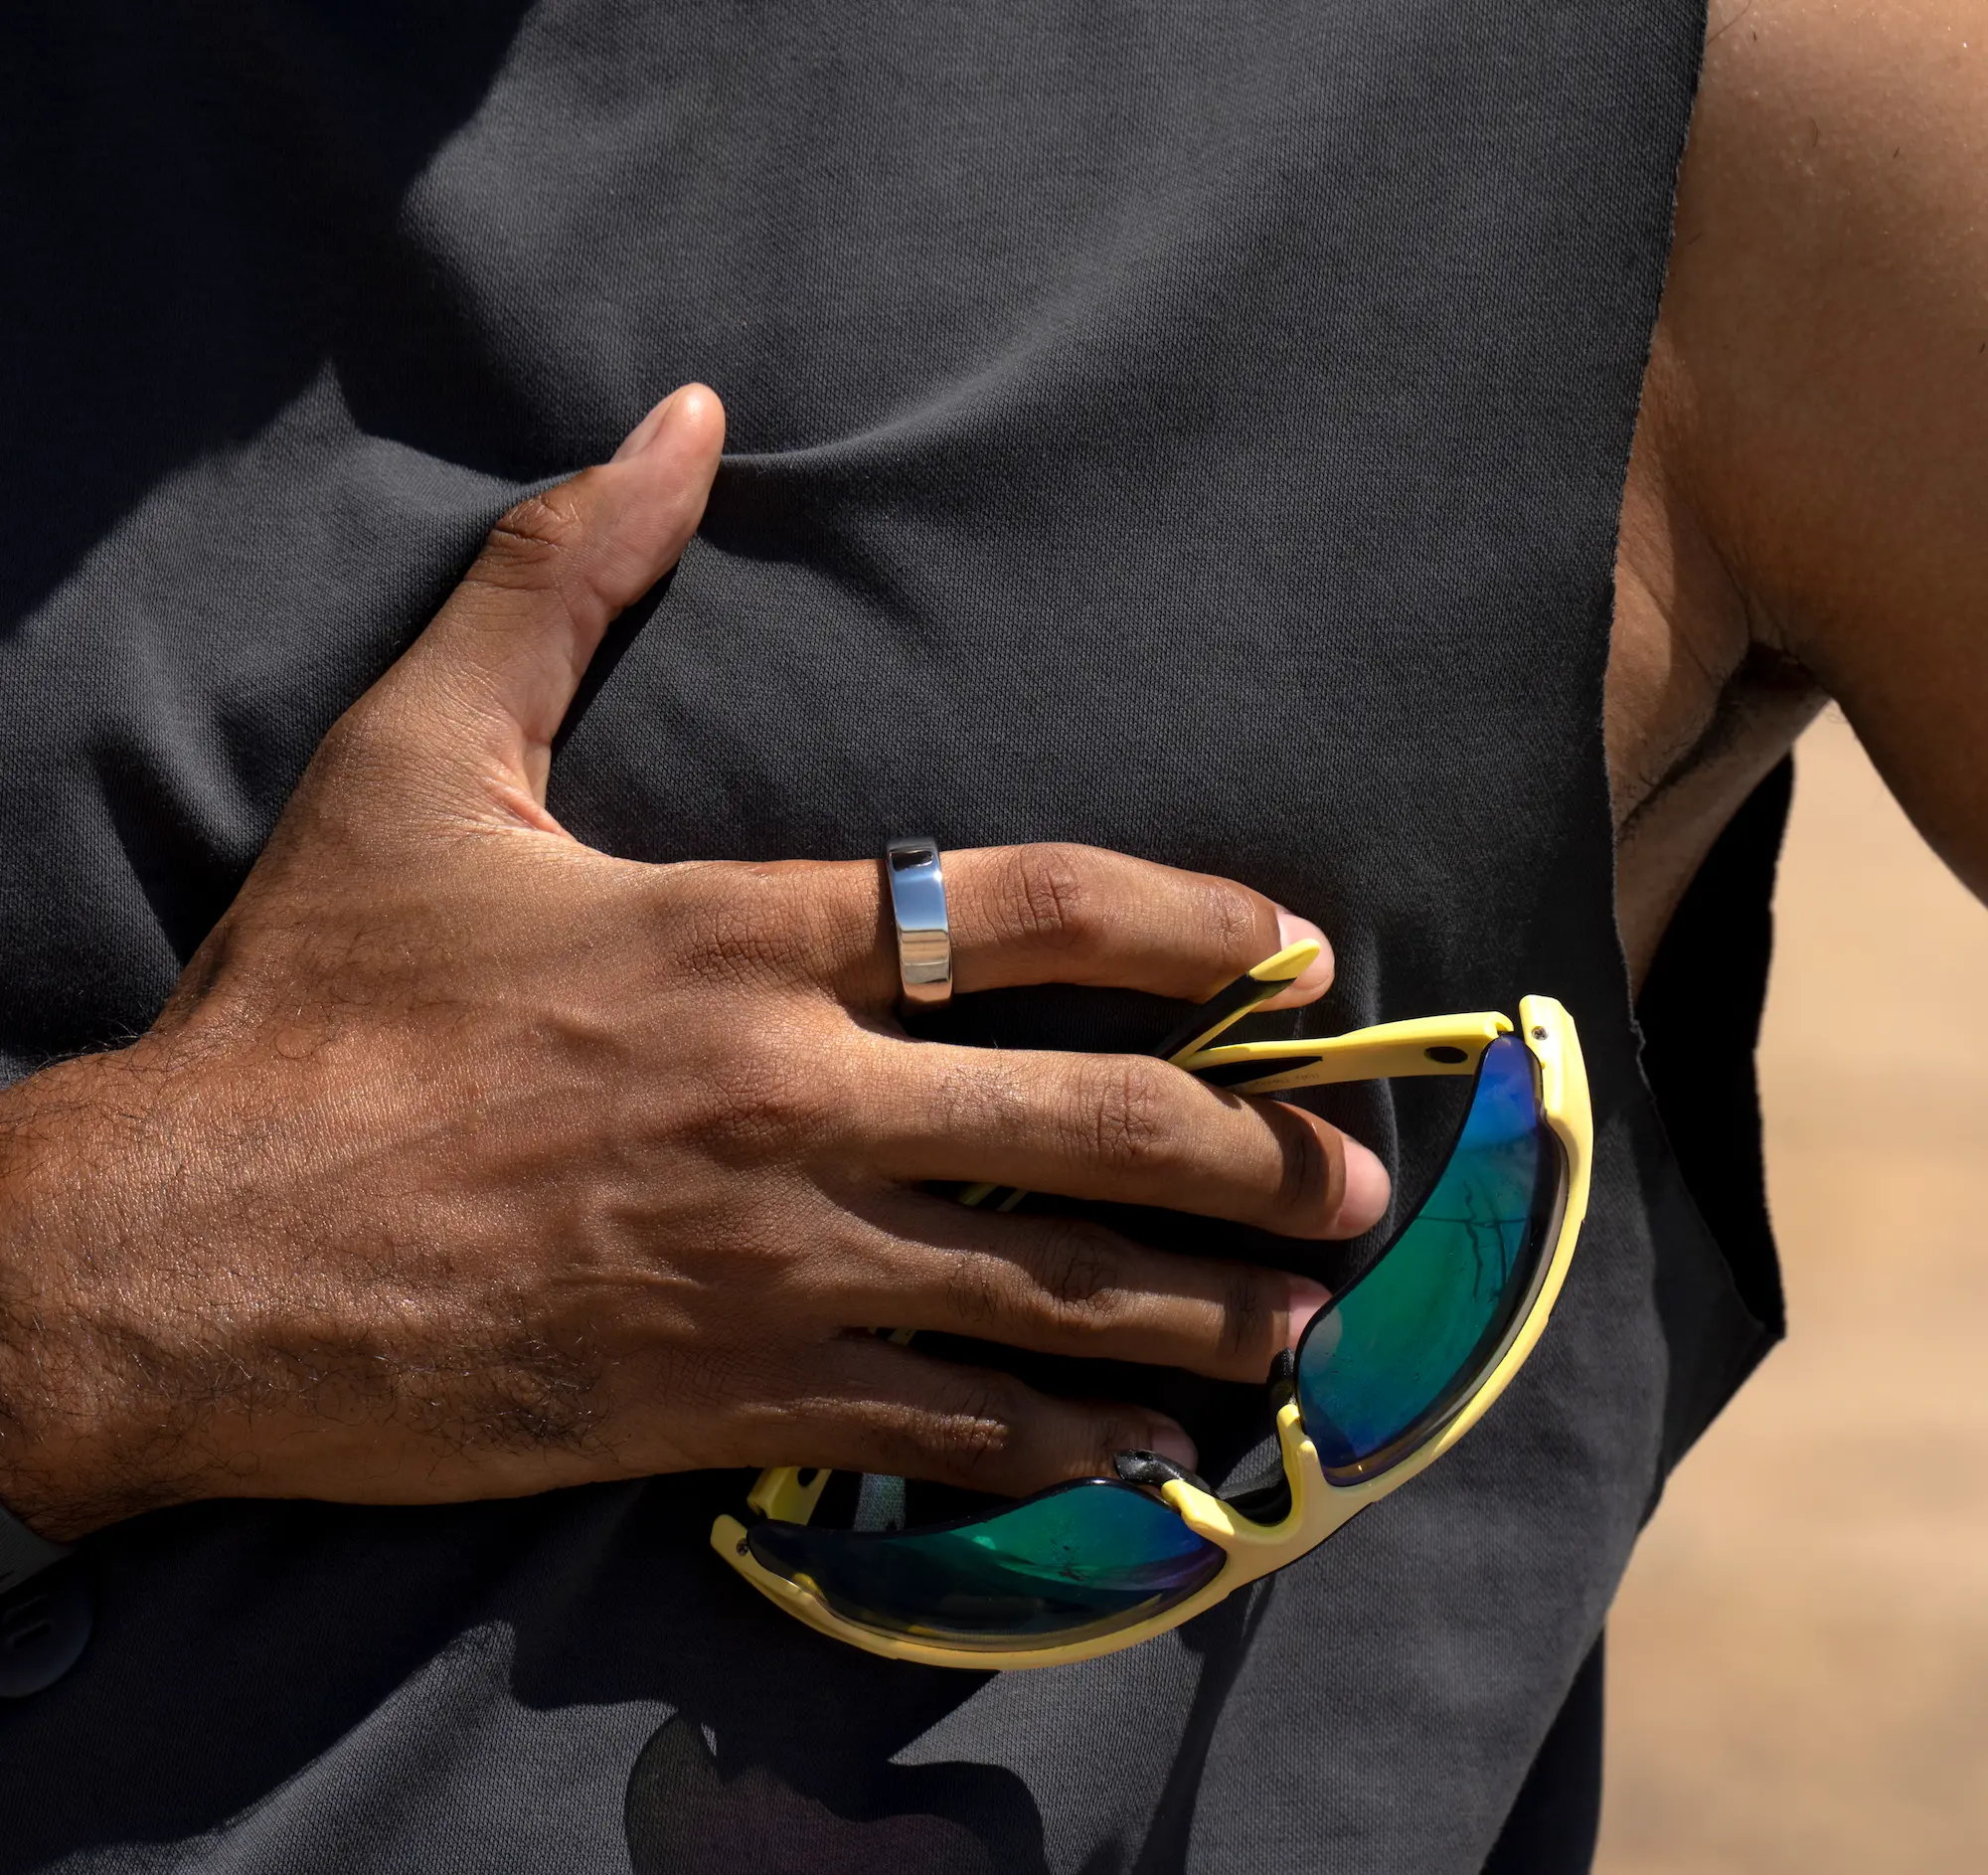 Oura ring review 2022: We tested the generation 3 model to see if it lives  up to the hype